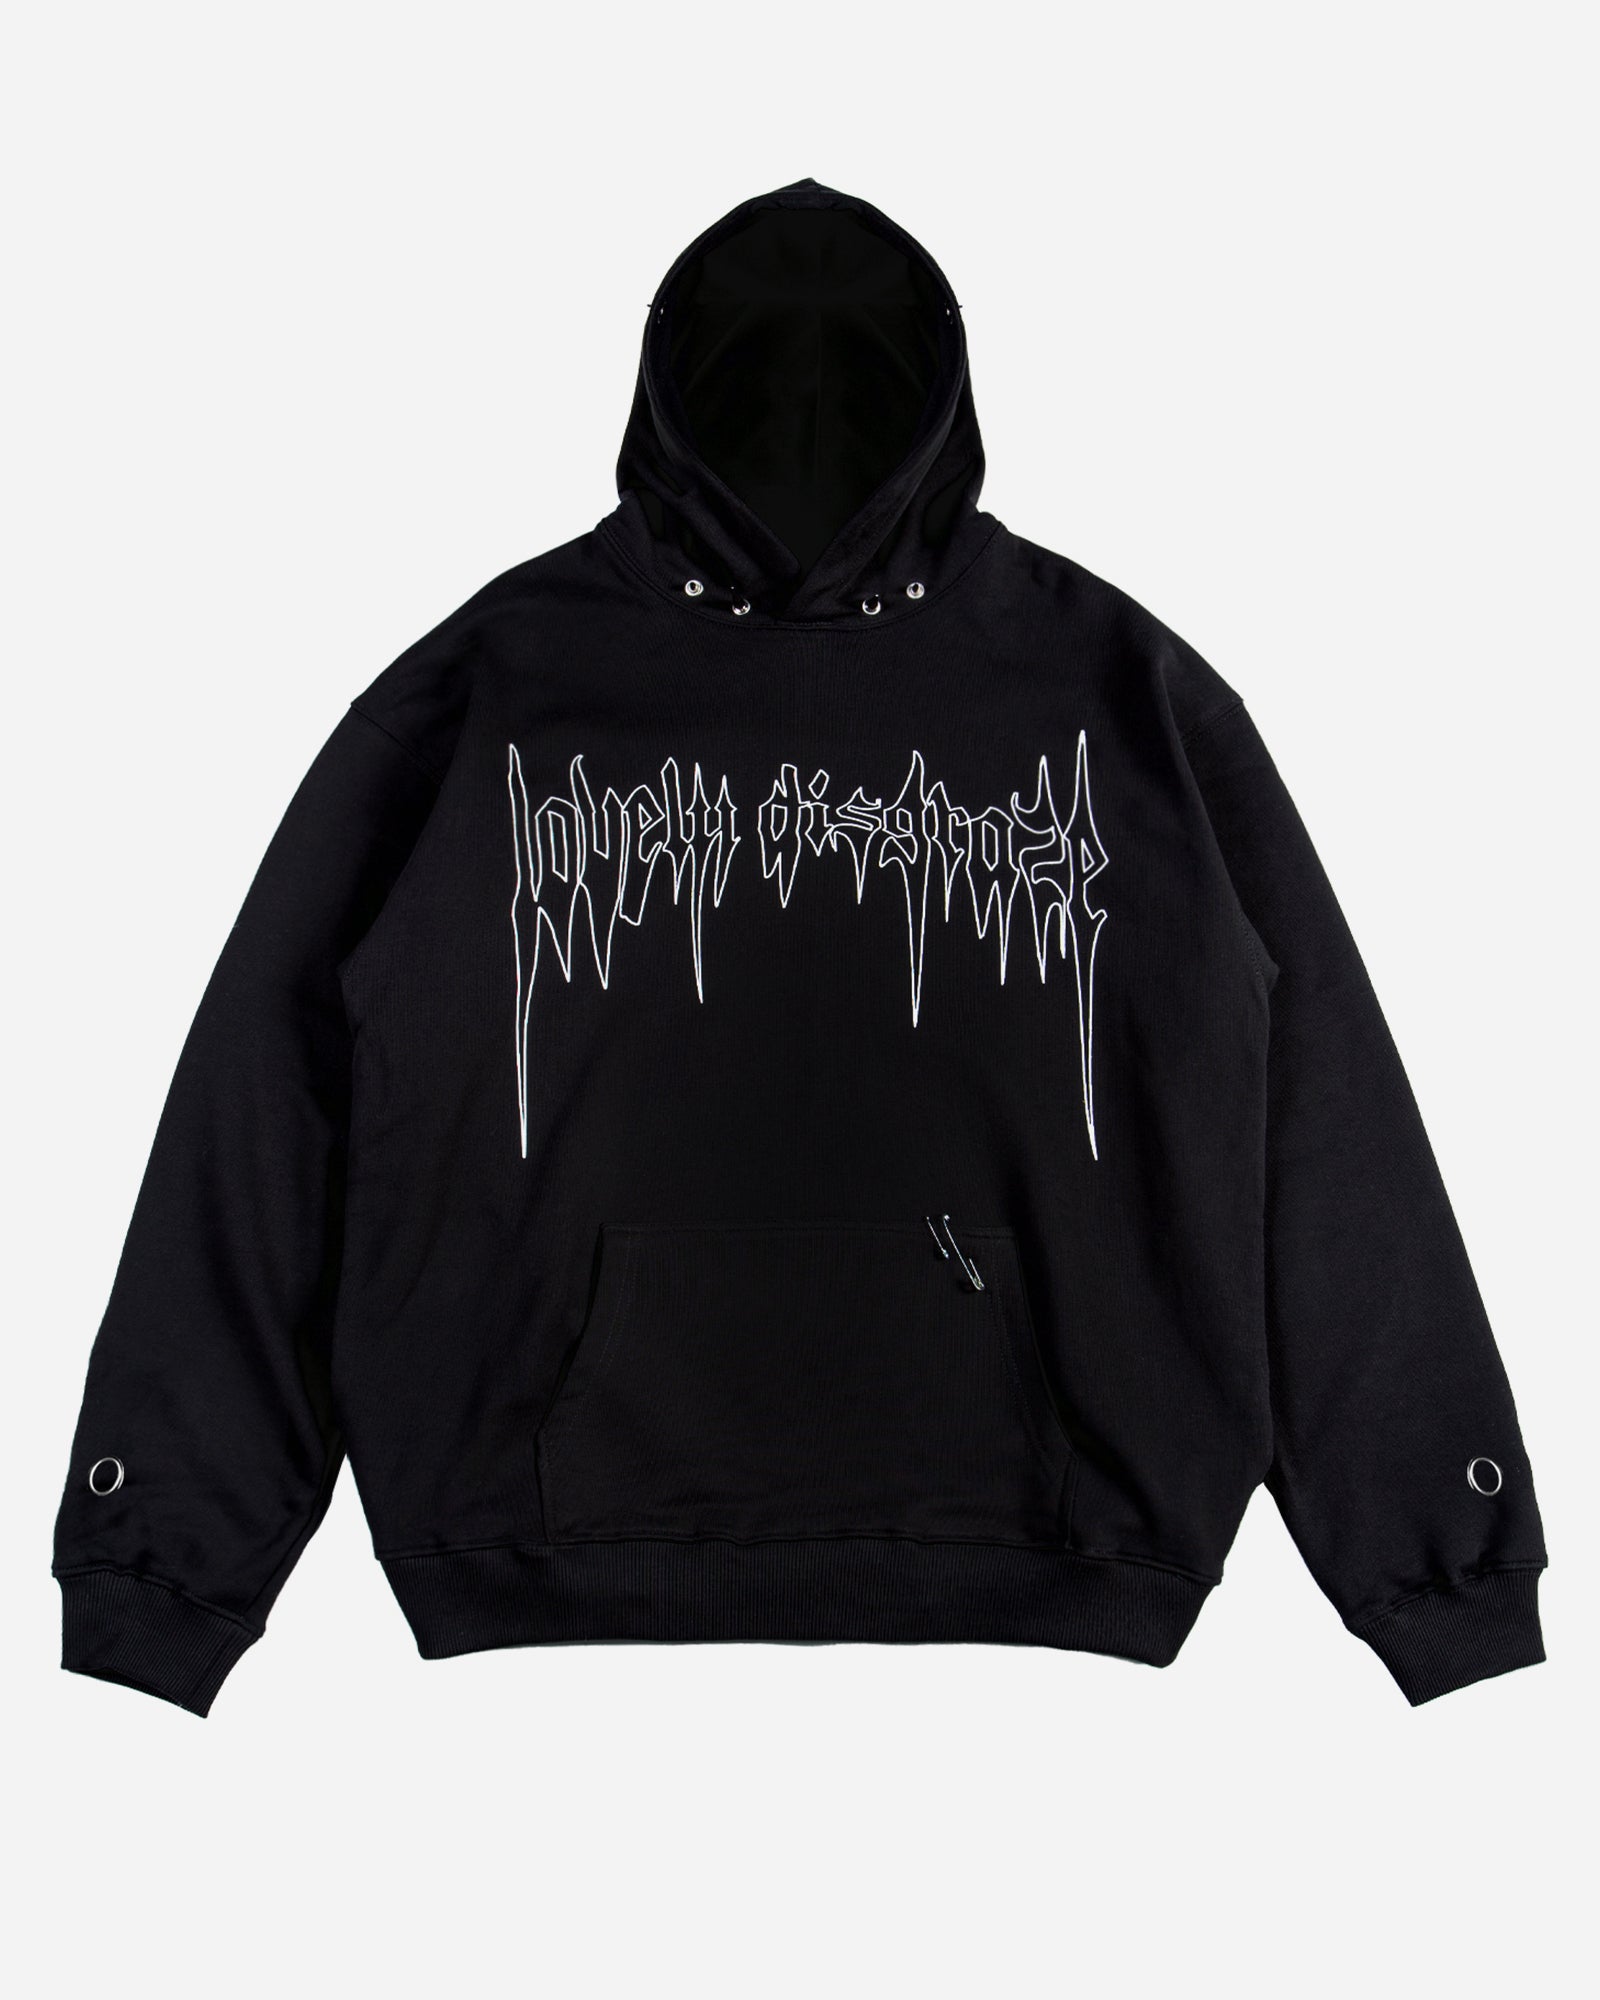 THE FACE OF GOD HOODIE